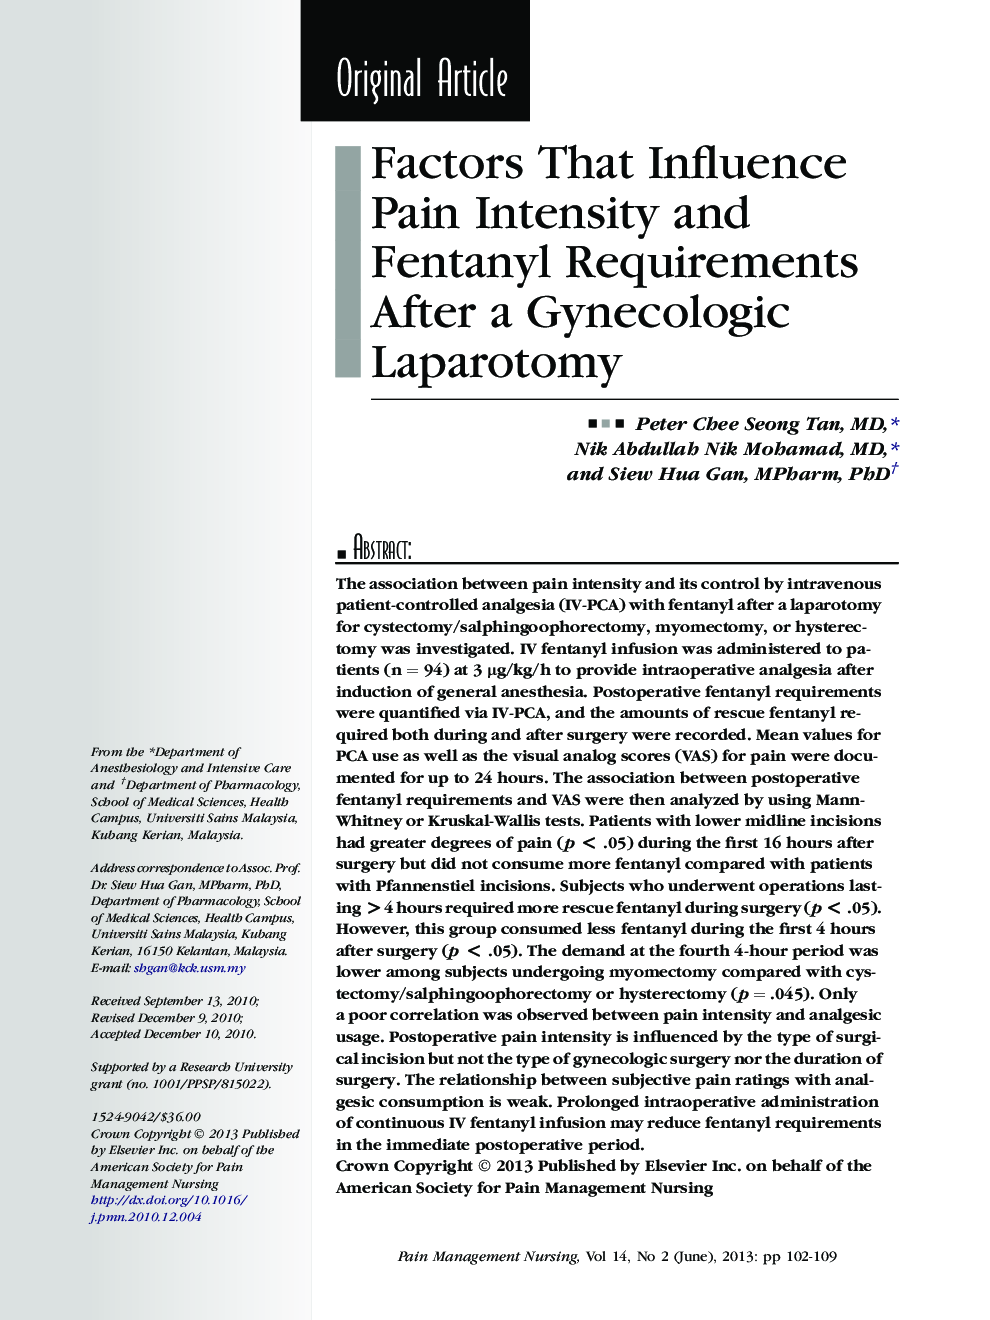 Factors That Influence Pain Intensity and Fentanyl Requirements After a Gynecologic Laparotomy 